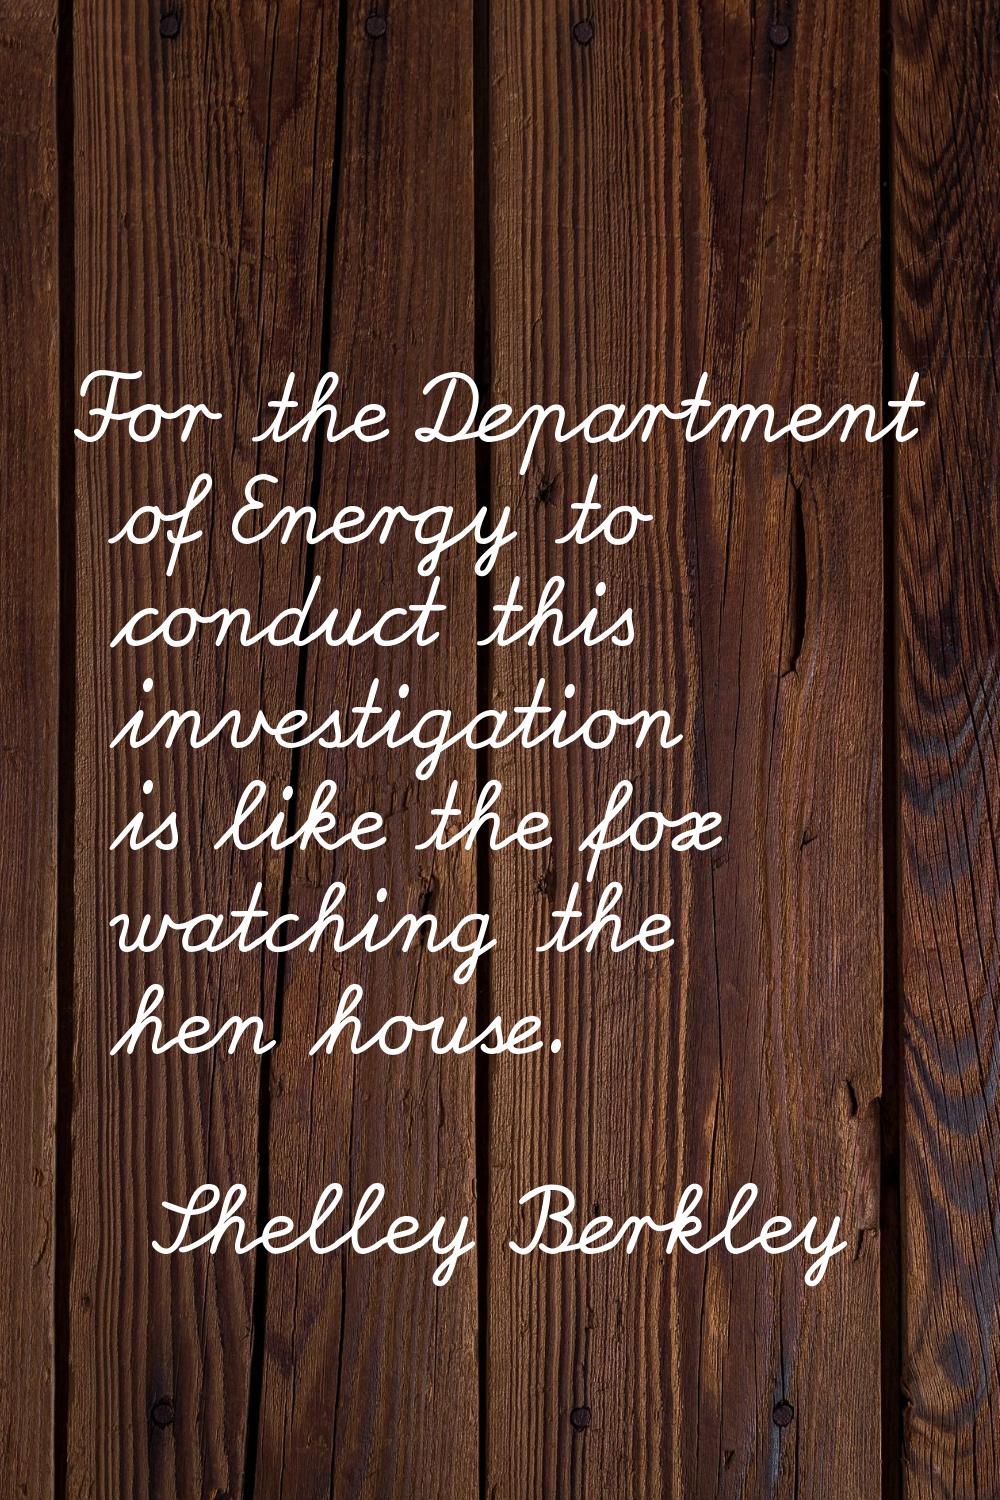 For the Department of Energy to conduct this investigation is like the fox watching the hen house.